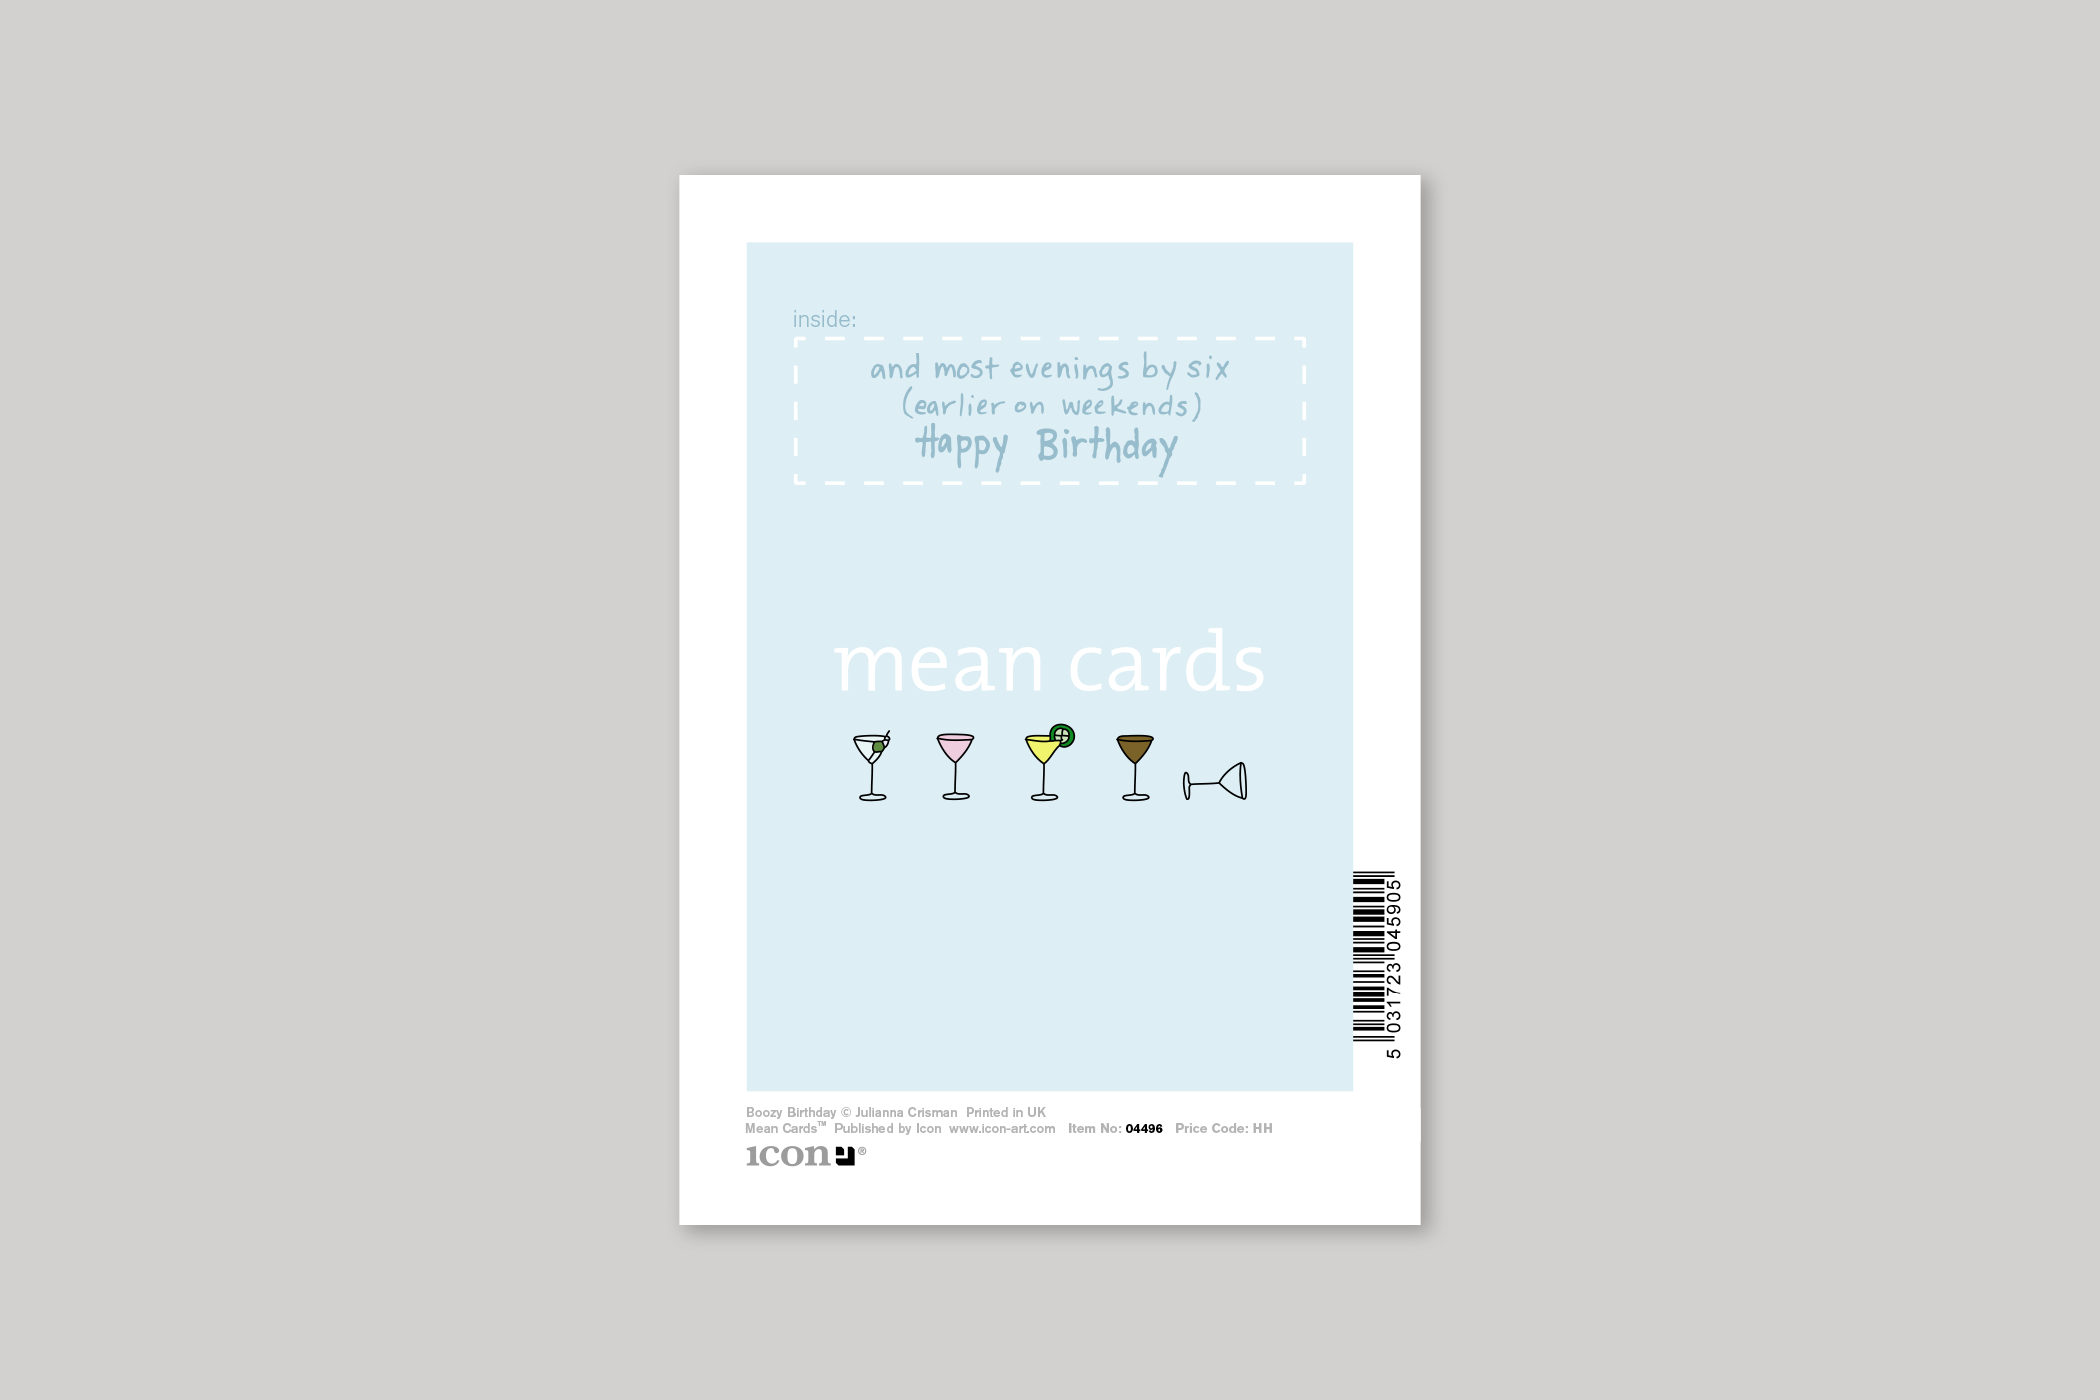 Boozy Birthday humorous illustration from Mean Cards range of greeting cards by Icon, with envelope.